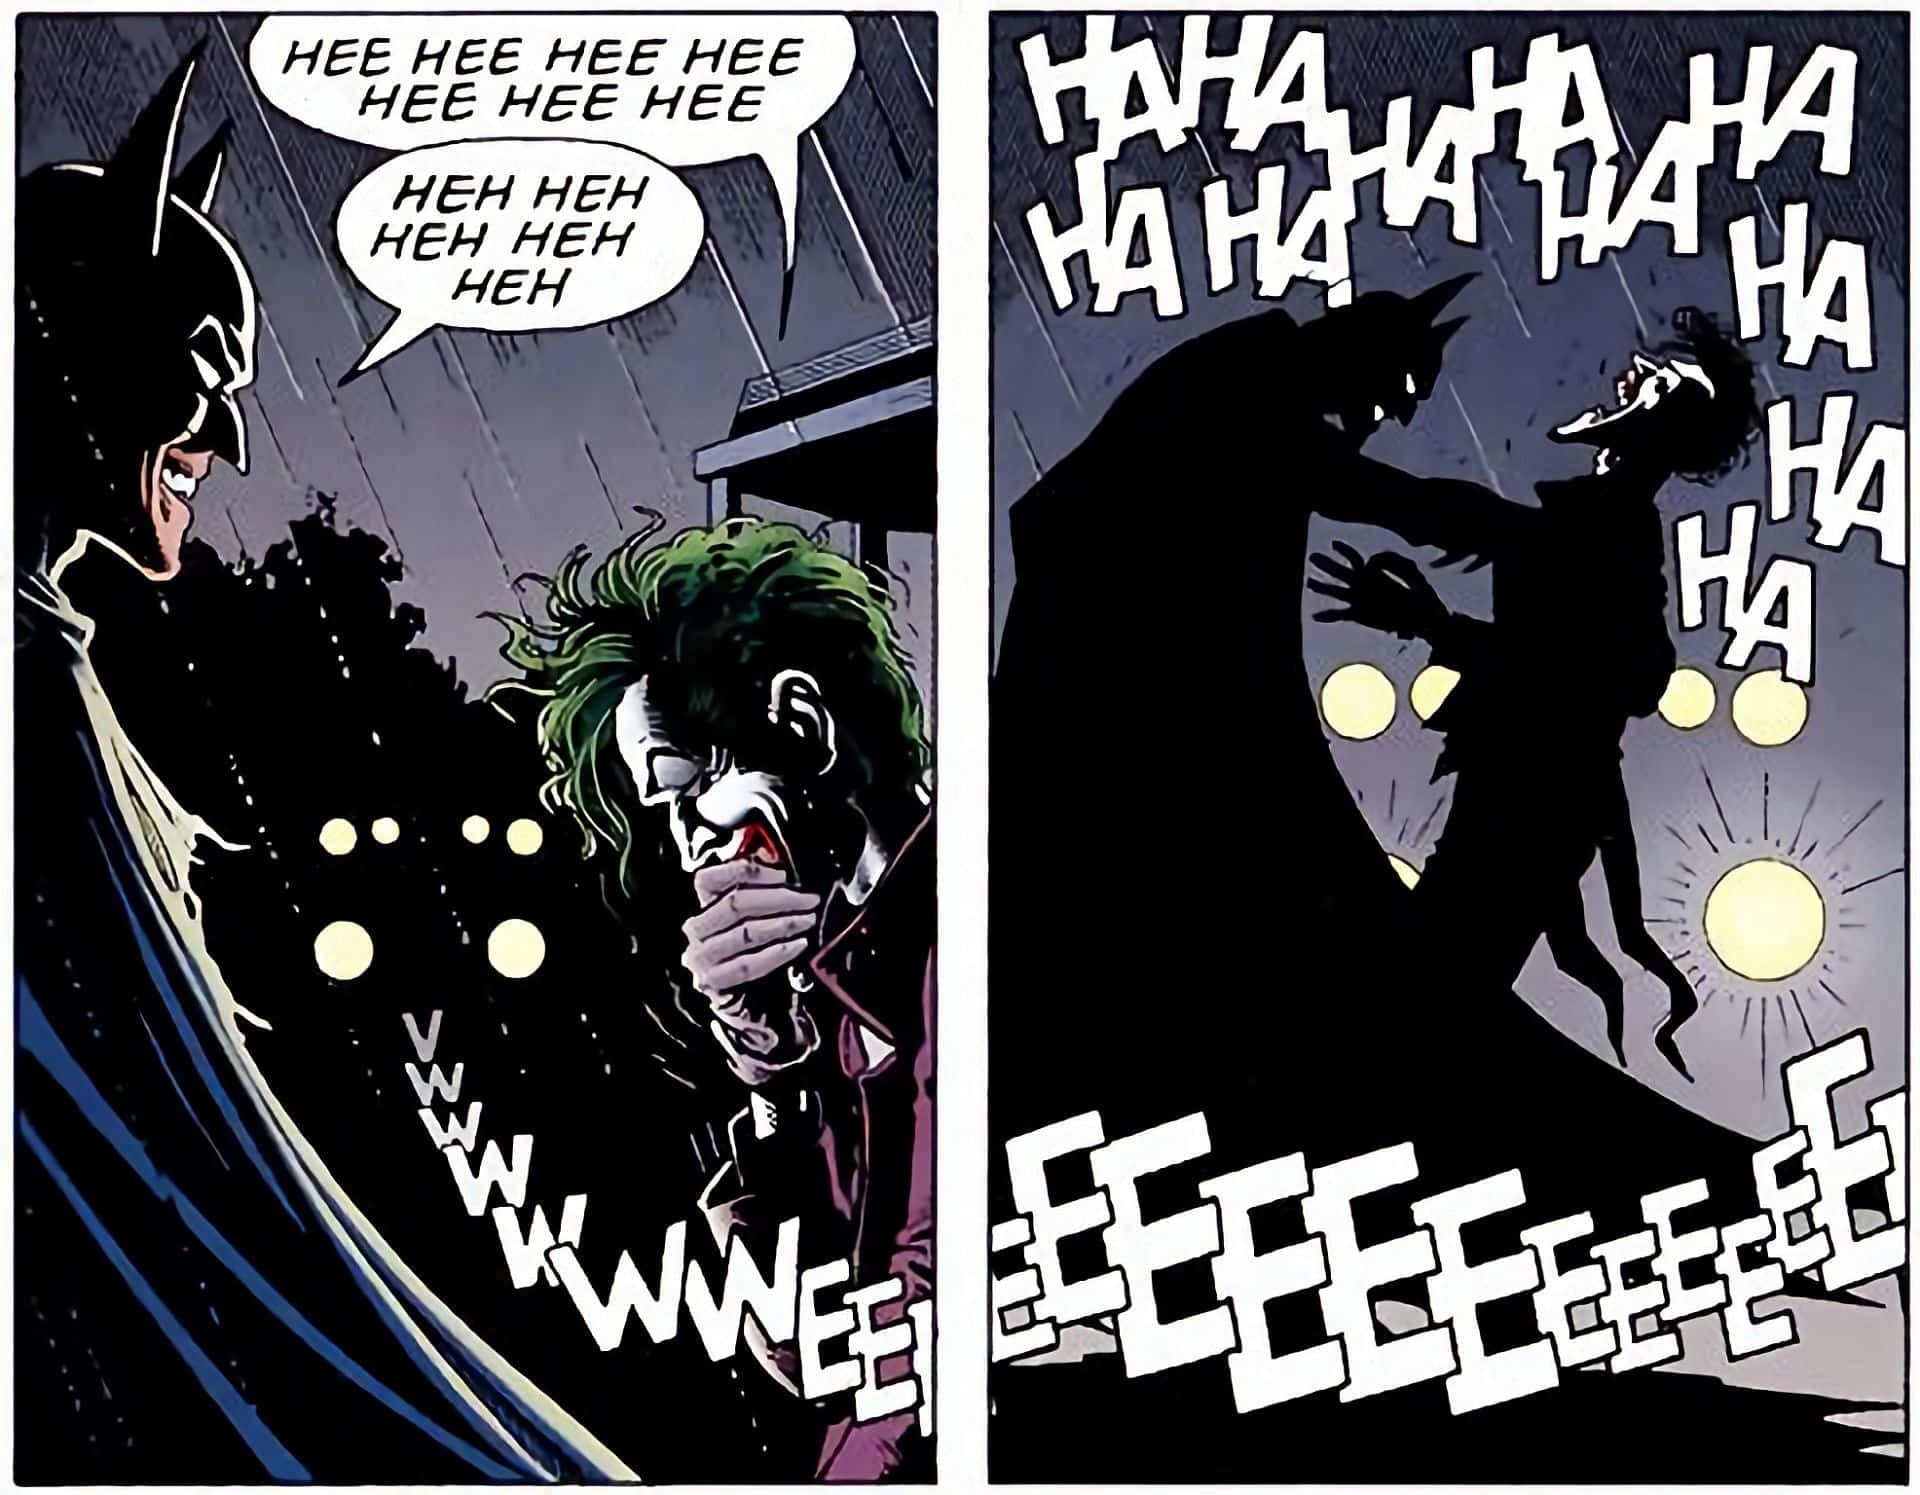 The iconic moment from The Killing Joke comic book - Joker holding a camera with a maniacal grin. Wallpaper